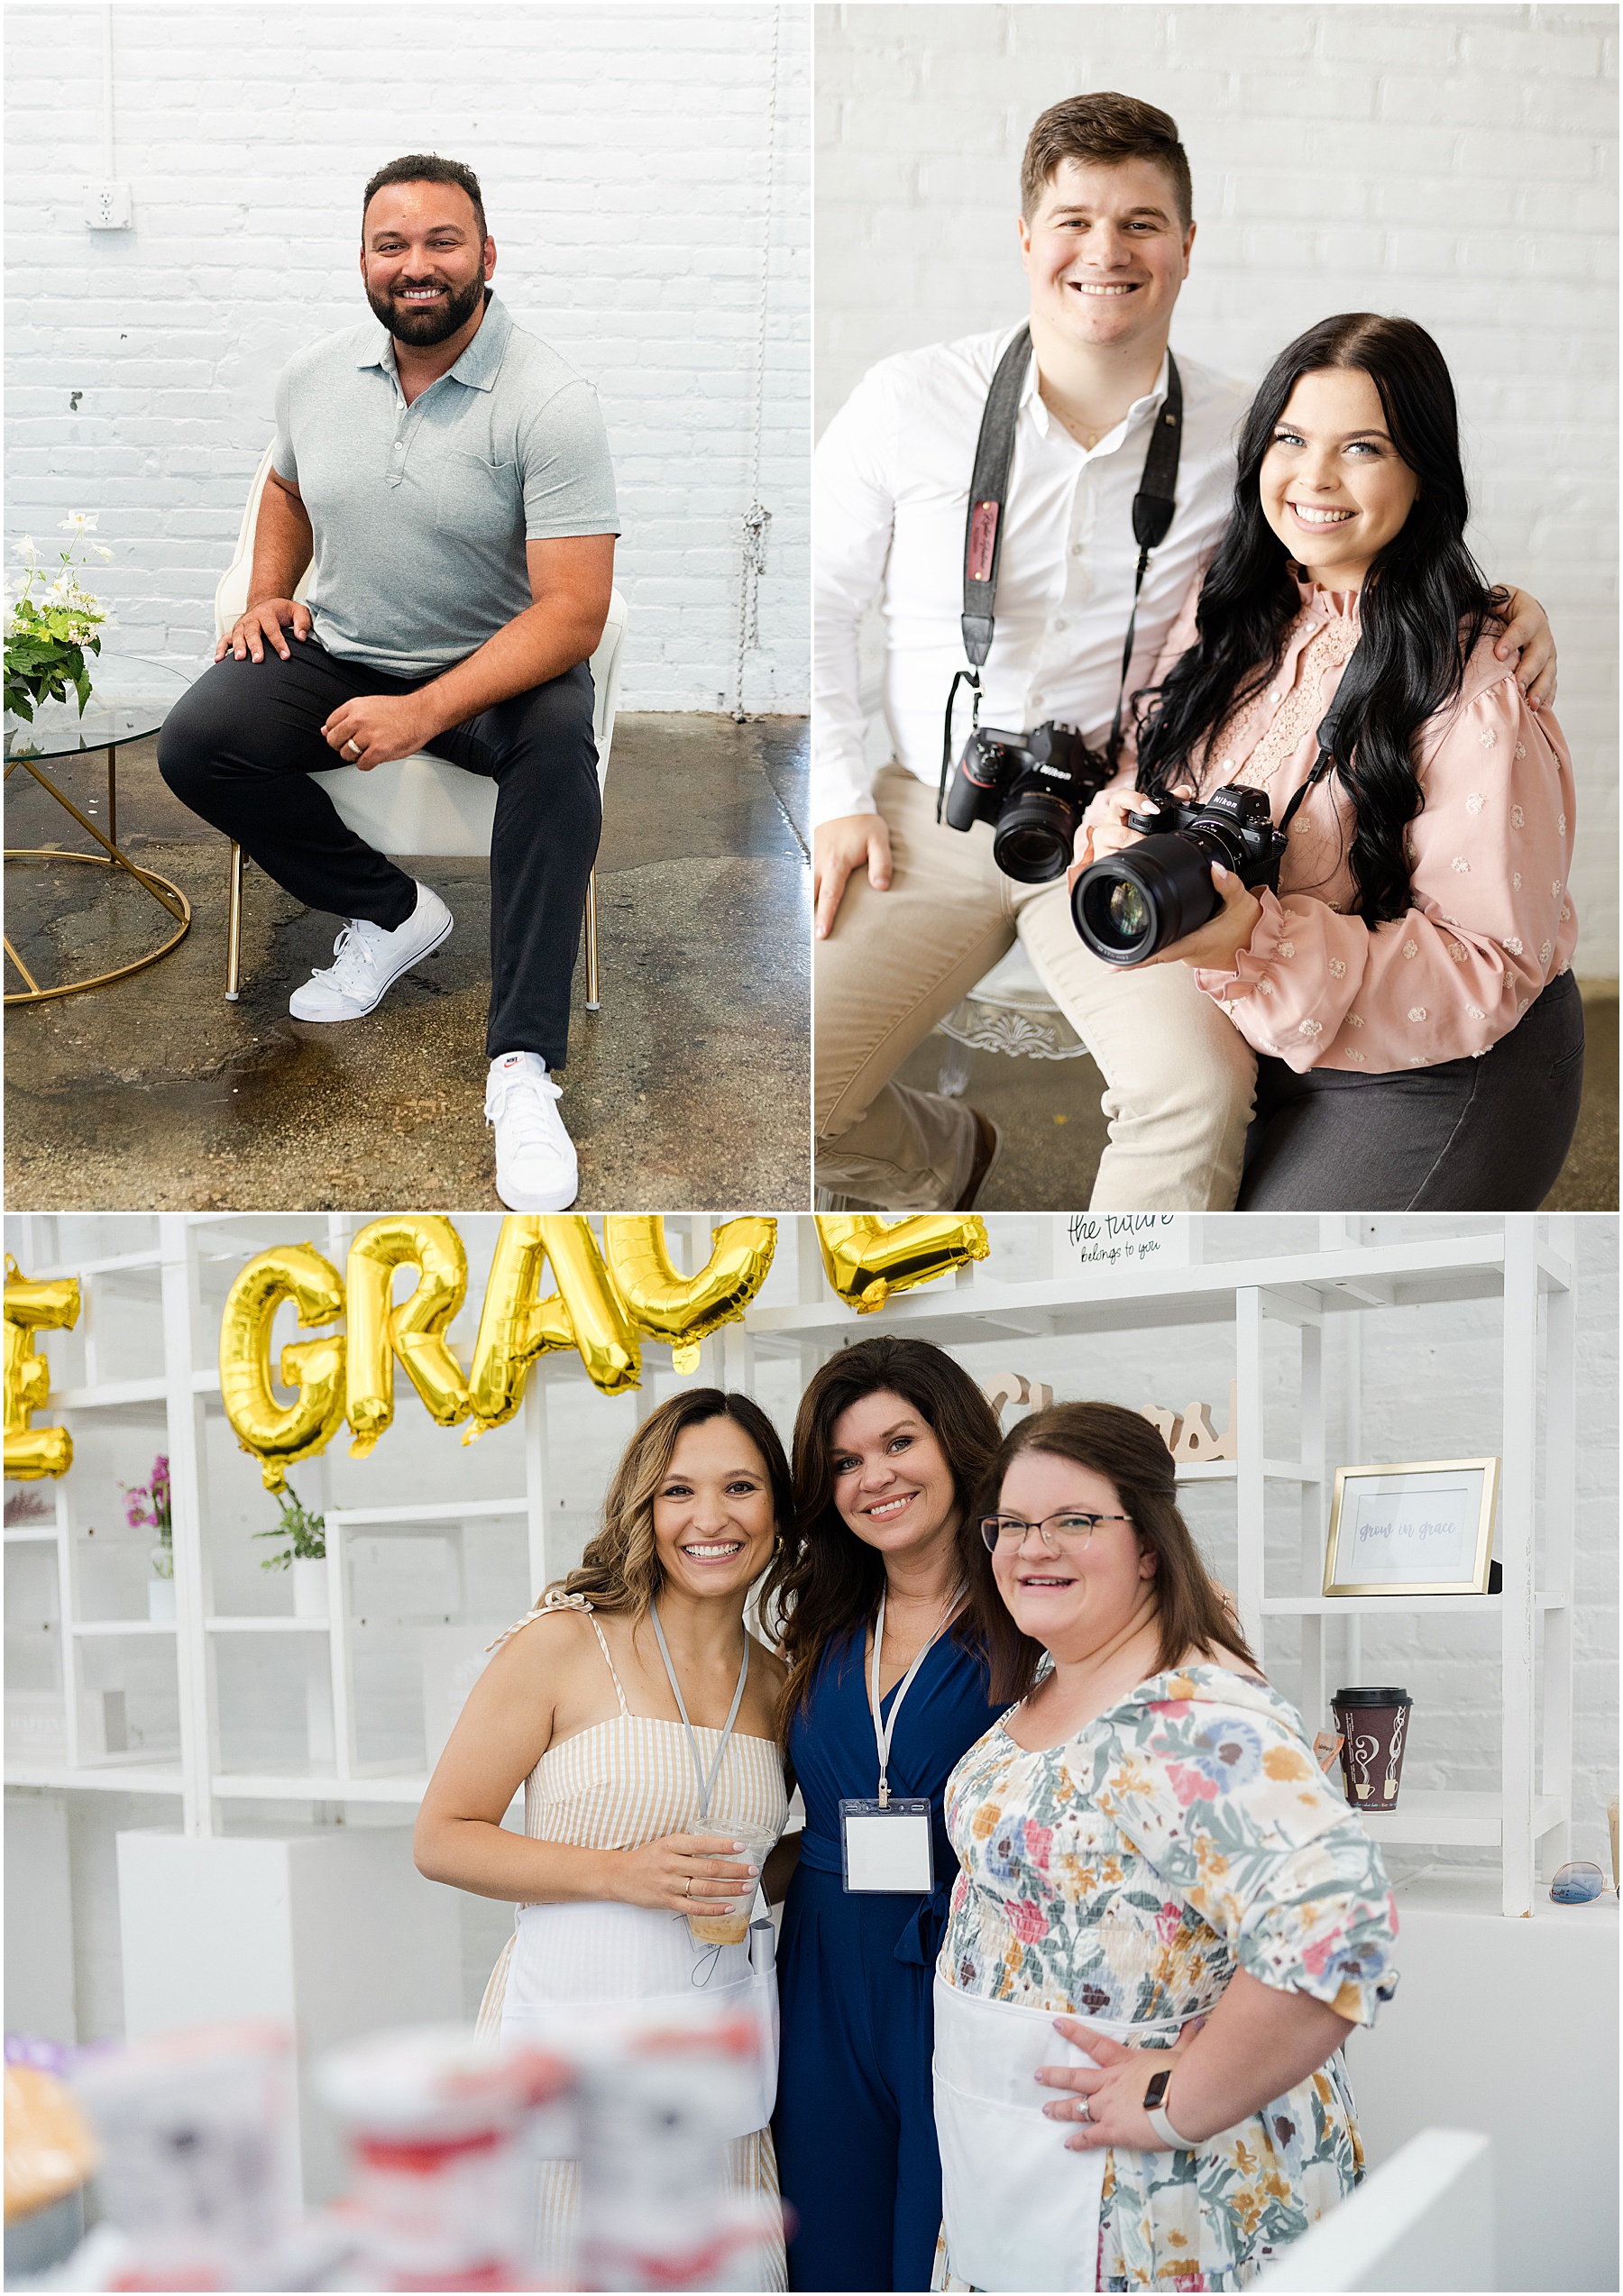 Attendee Headshots at Wedding Photographer Conference in Ohio 